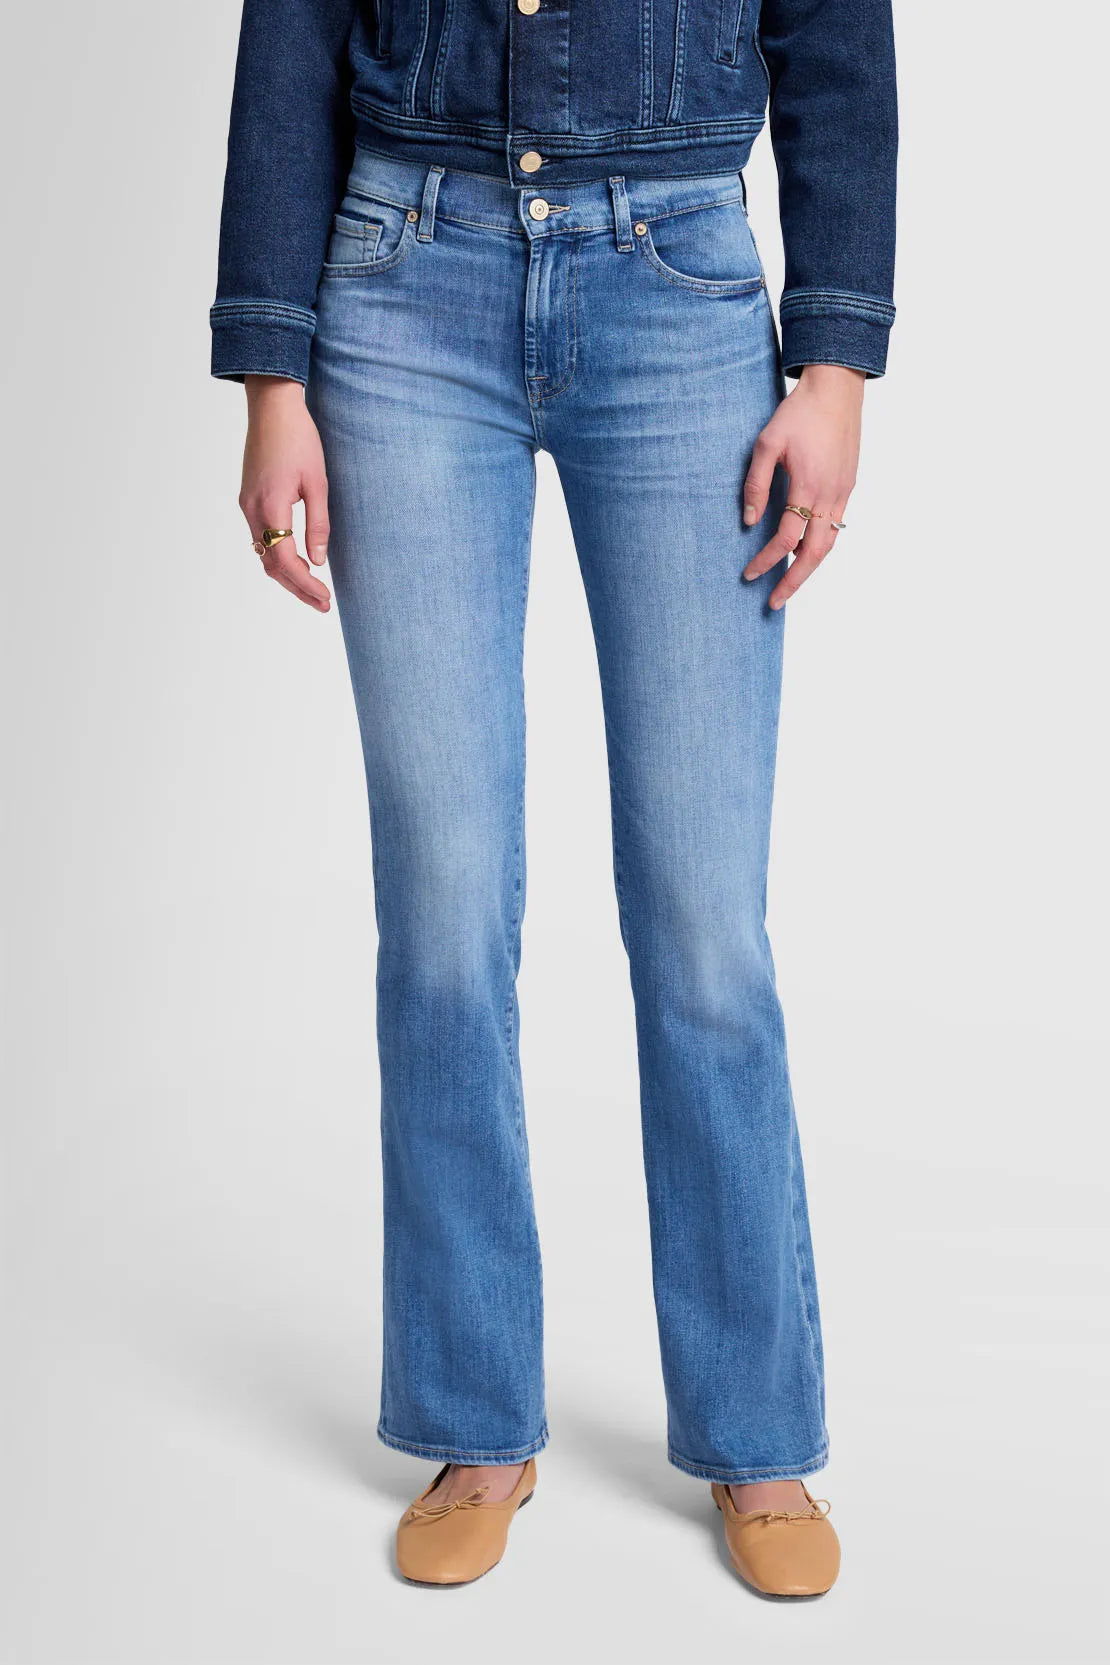 Jeans Bootcut Mare in Light Blue7 For All Mankind - Anita Hass